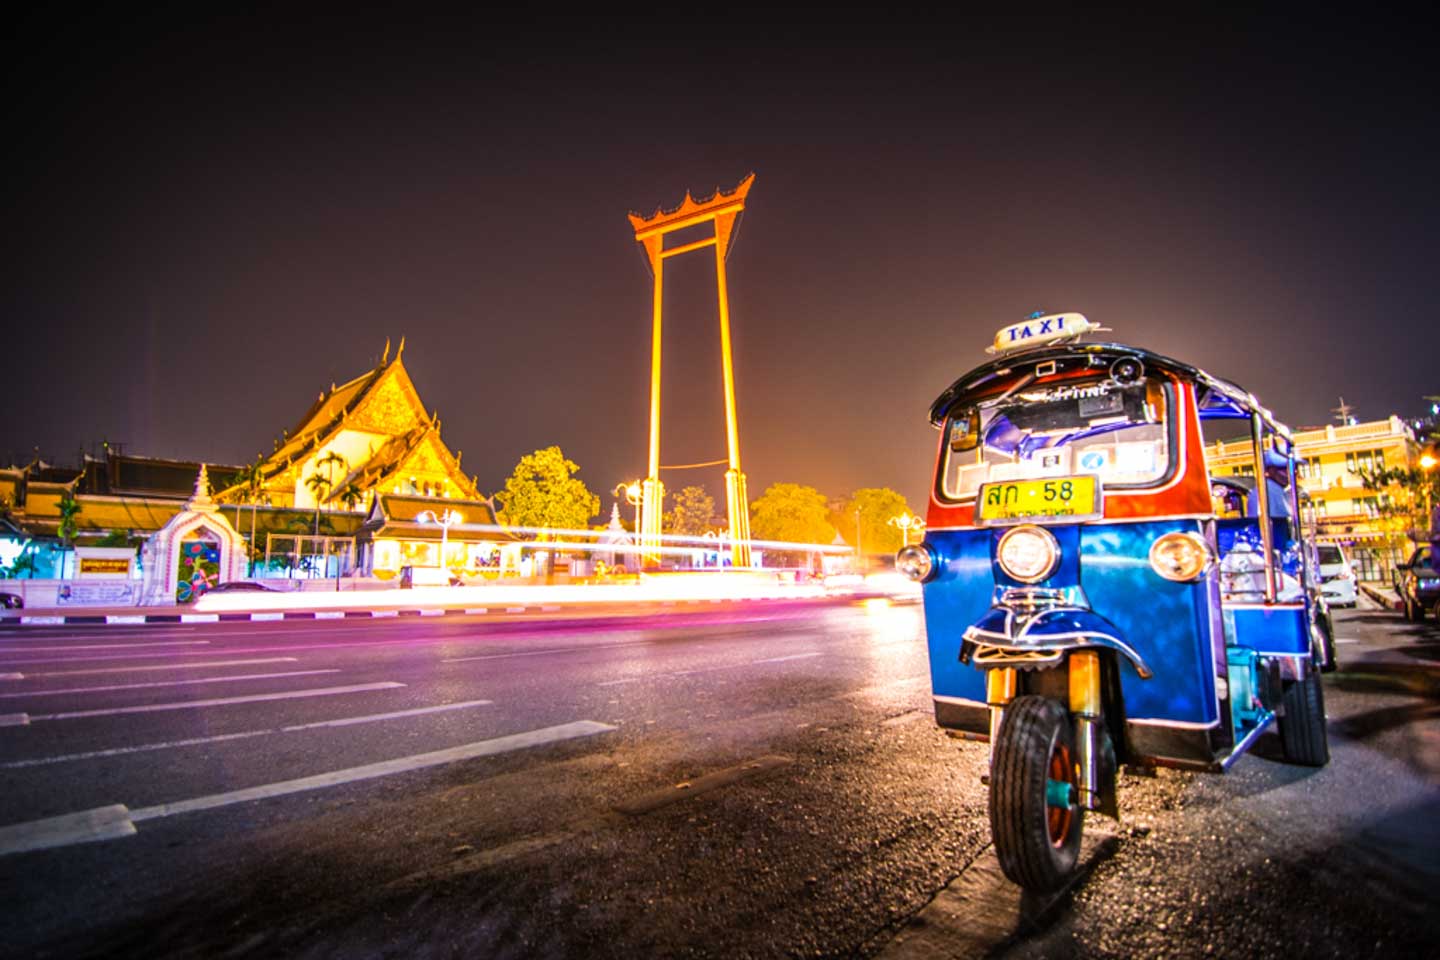 tipping-in-thailand-what-to-tip-tuk-tuk - GETTING STAMPED